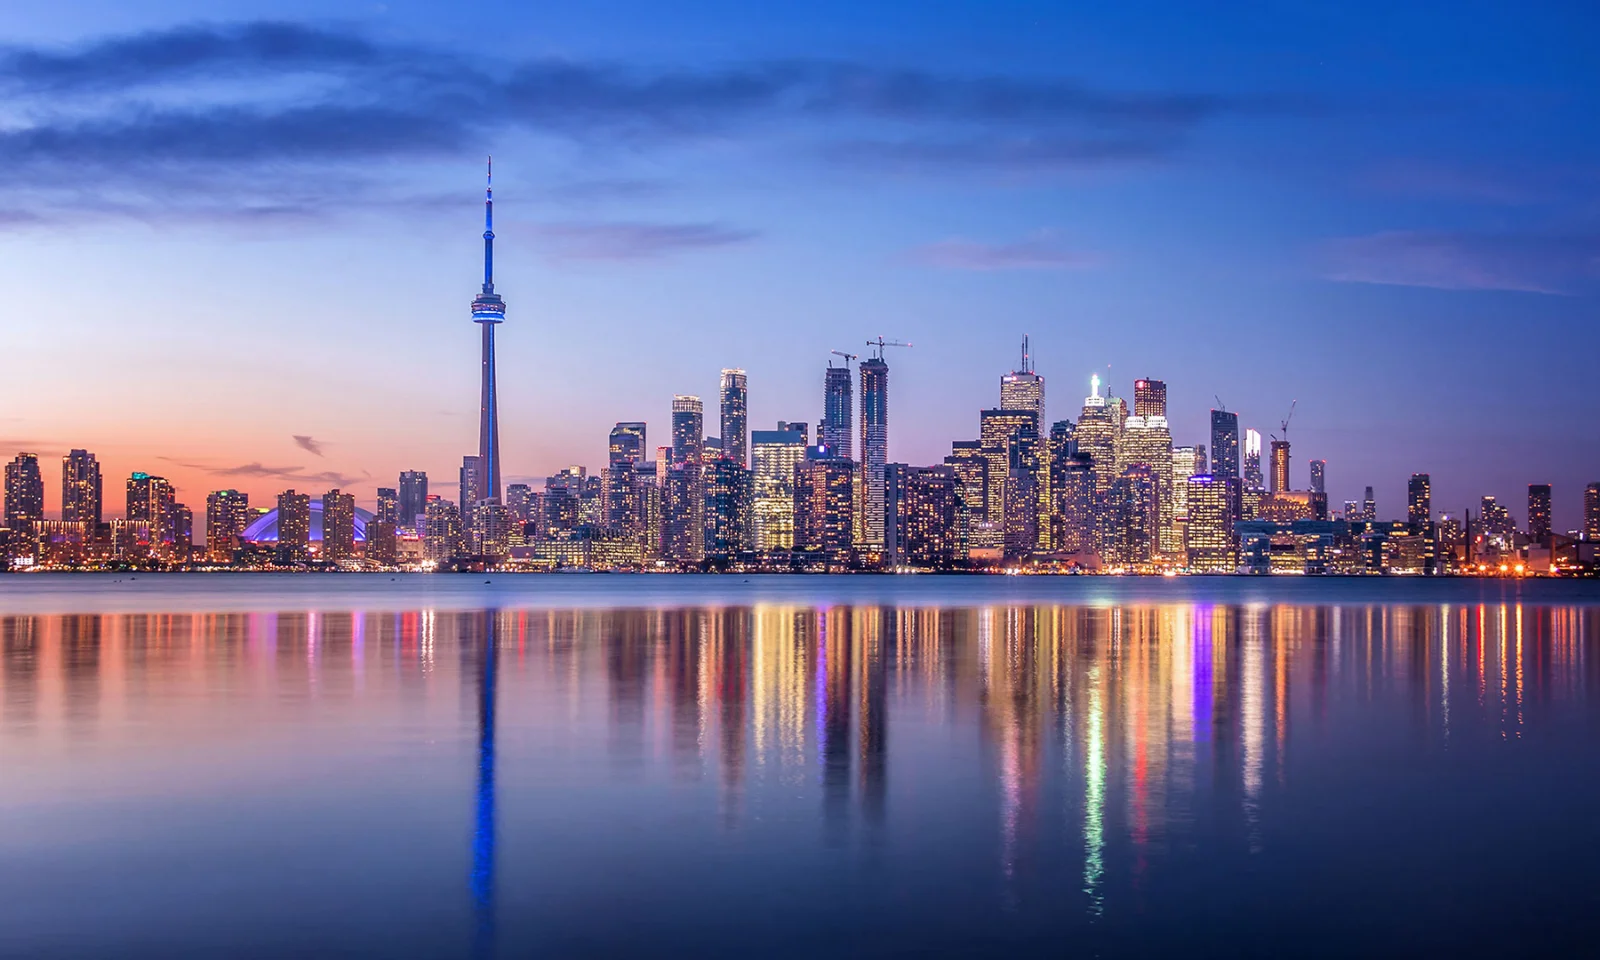 The image features a stunning city skyline at dusk, with tall buildings and the iconic CN Tower prominently visible. The serene water in the foreground reflects the vibrant lights of the city, creating a symmetrical and tranquil scene. This visual captures the essence of stability, growth, and the future, making it an ideal representation for the insurance industry. The clear, calm waters and the well-lit cityscape symbolize the industry&#039;s promise of security, protection, and forward-thinking solutions.